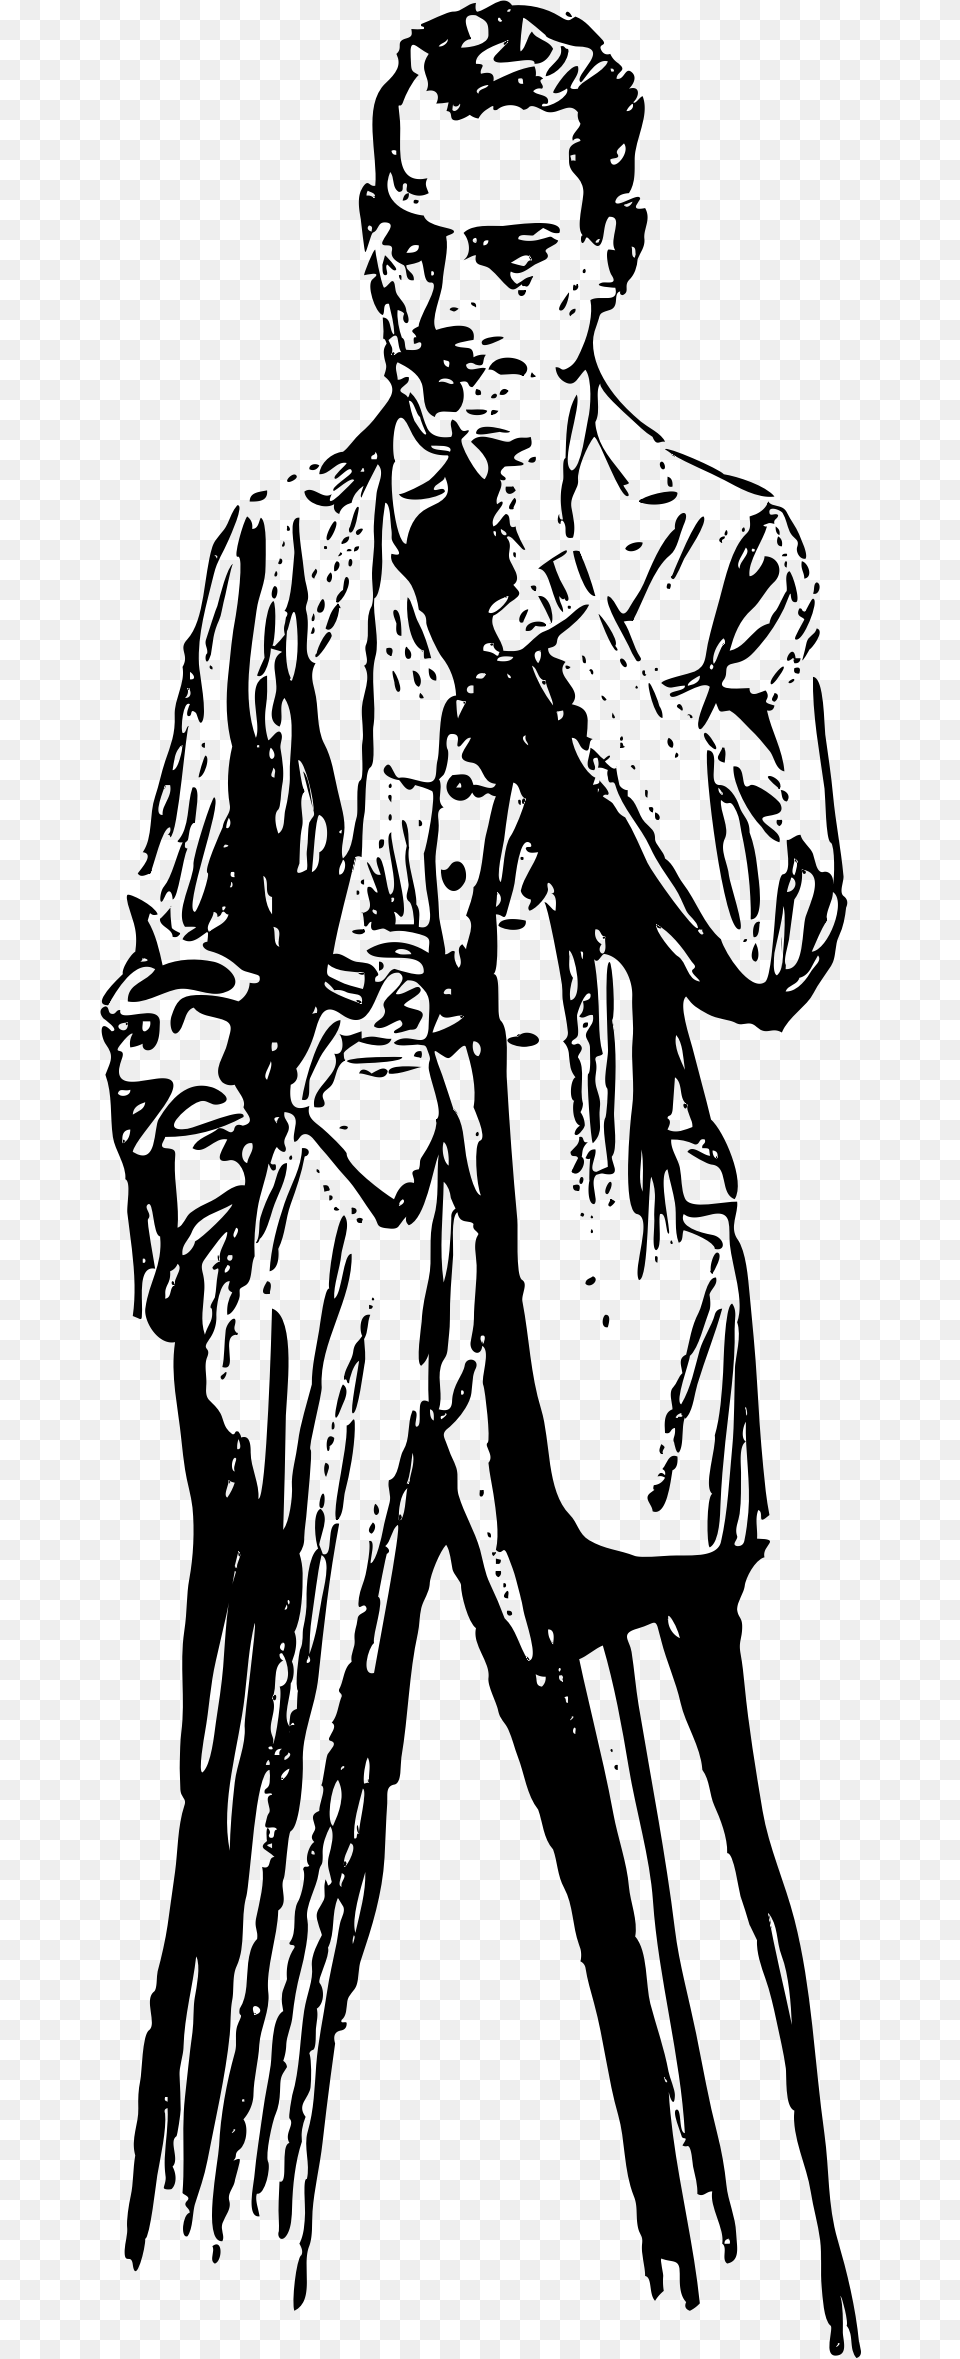 This Icons Design Of Moustachioed Man In Suit, Gray Free Transparent Png